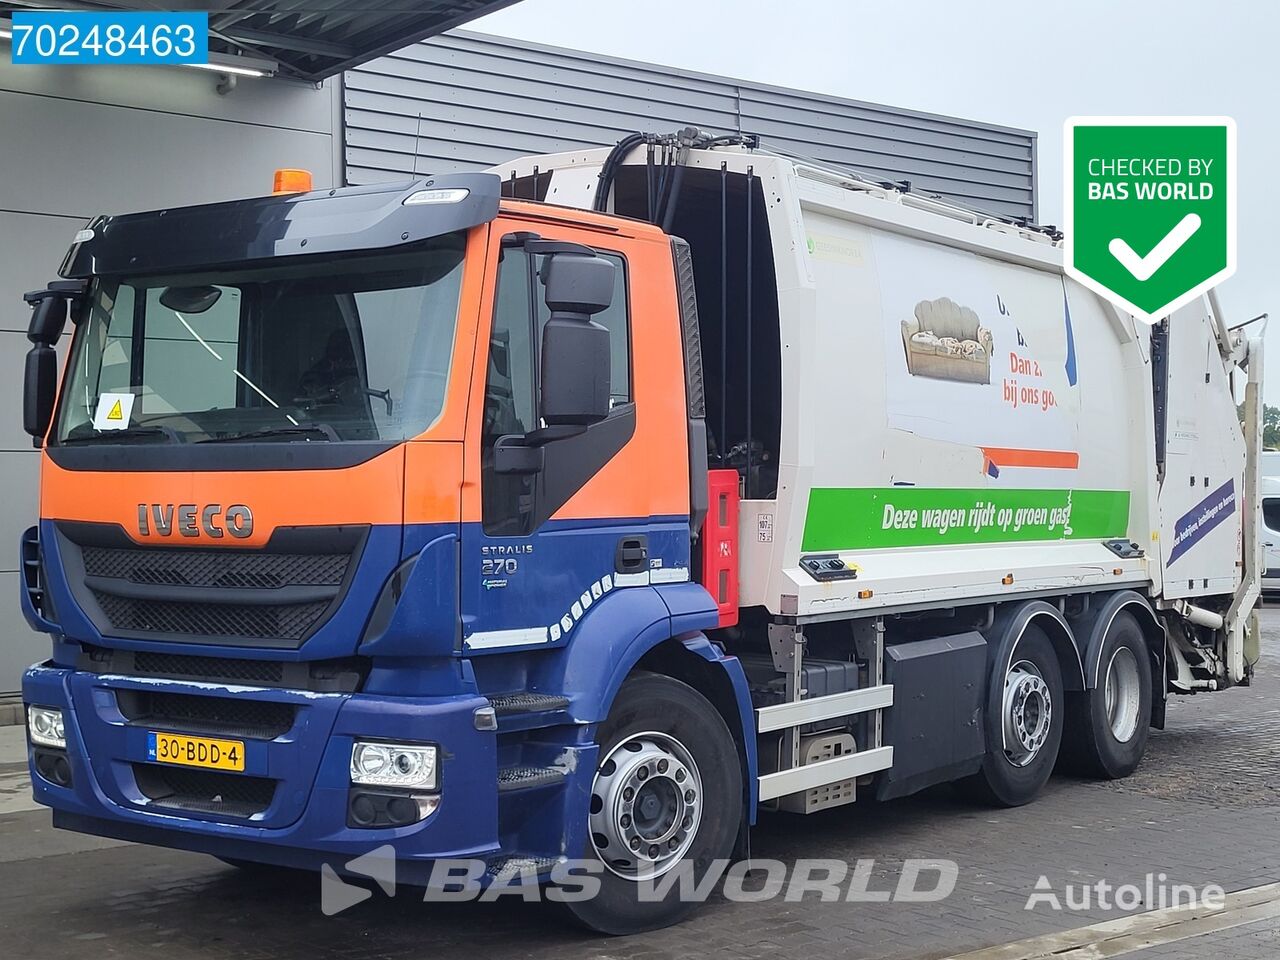 IVECO Stralis 270 6X2 NL-Truck CNG Geesink GPM III v 20H25 Retarder Eu ごみ回収車